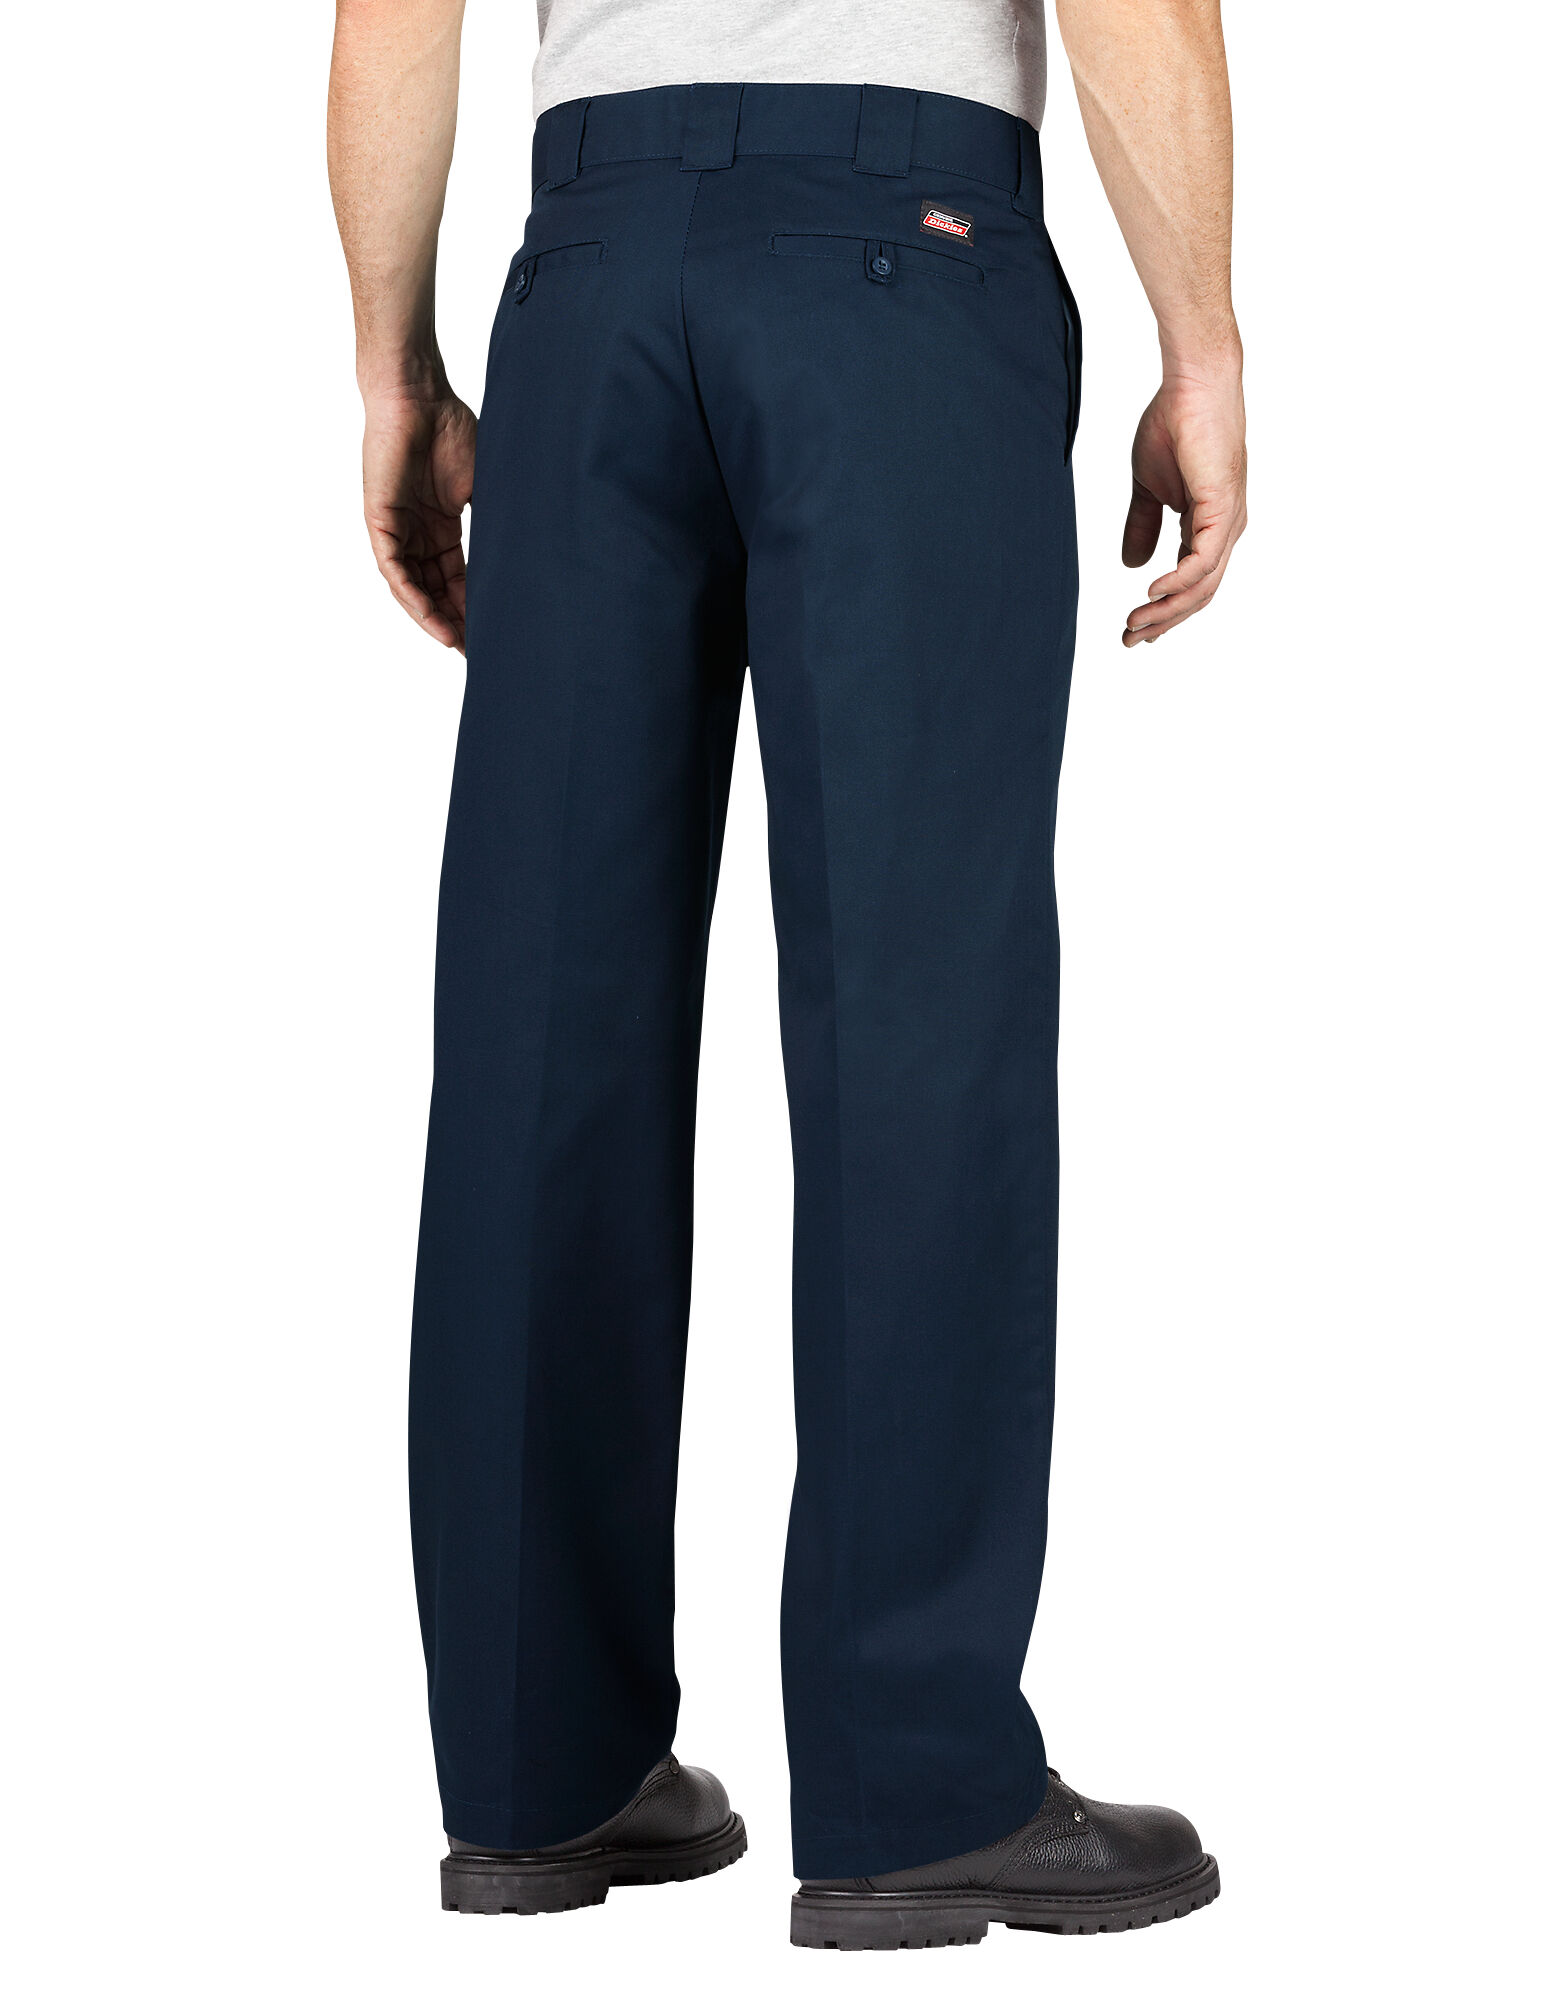 Since 1922, Dickies quality has been built in every product.